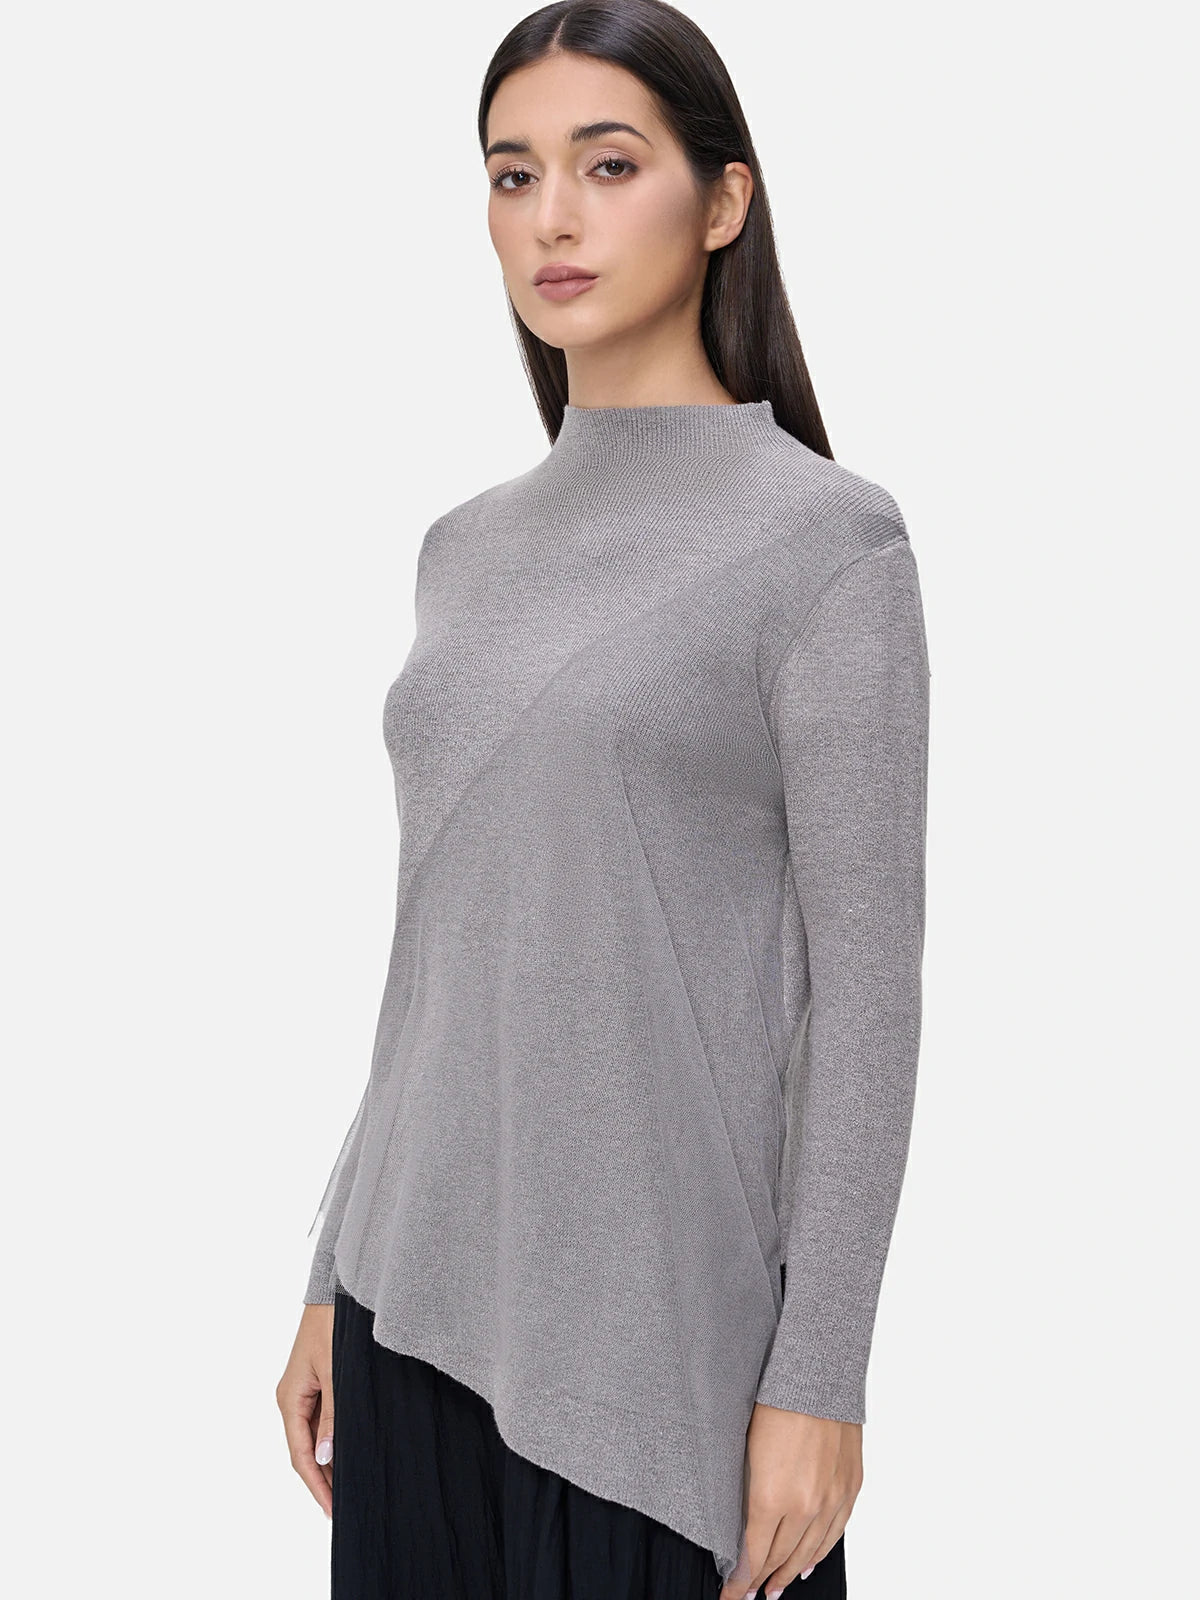 Fashionable gray semi-turtleneck sweater with asymmetric design and lace mesh, creating a unique look.